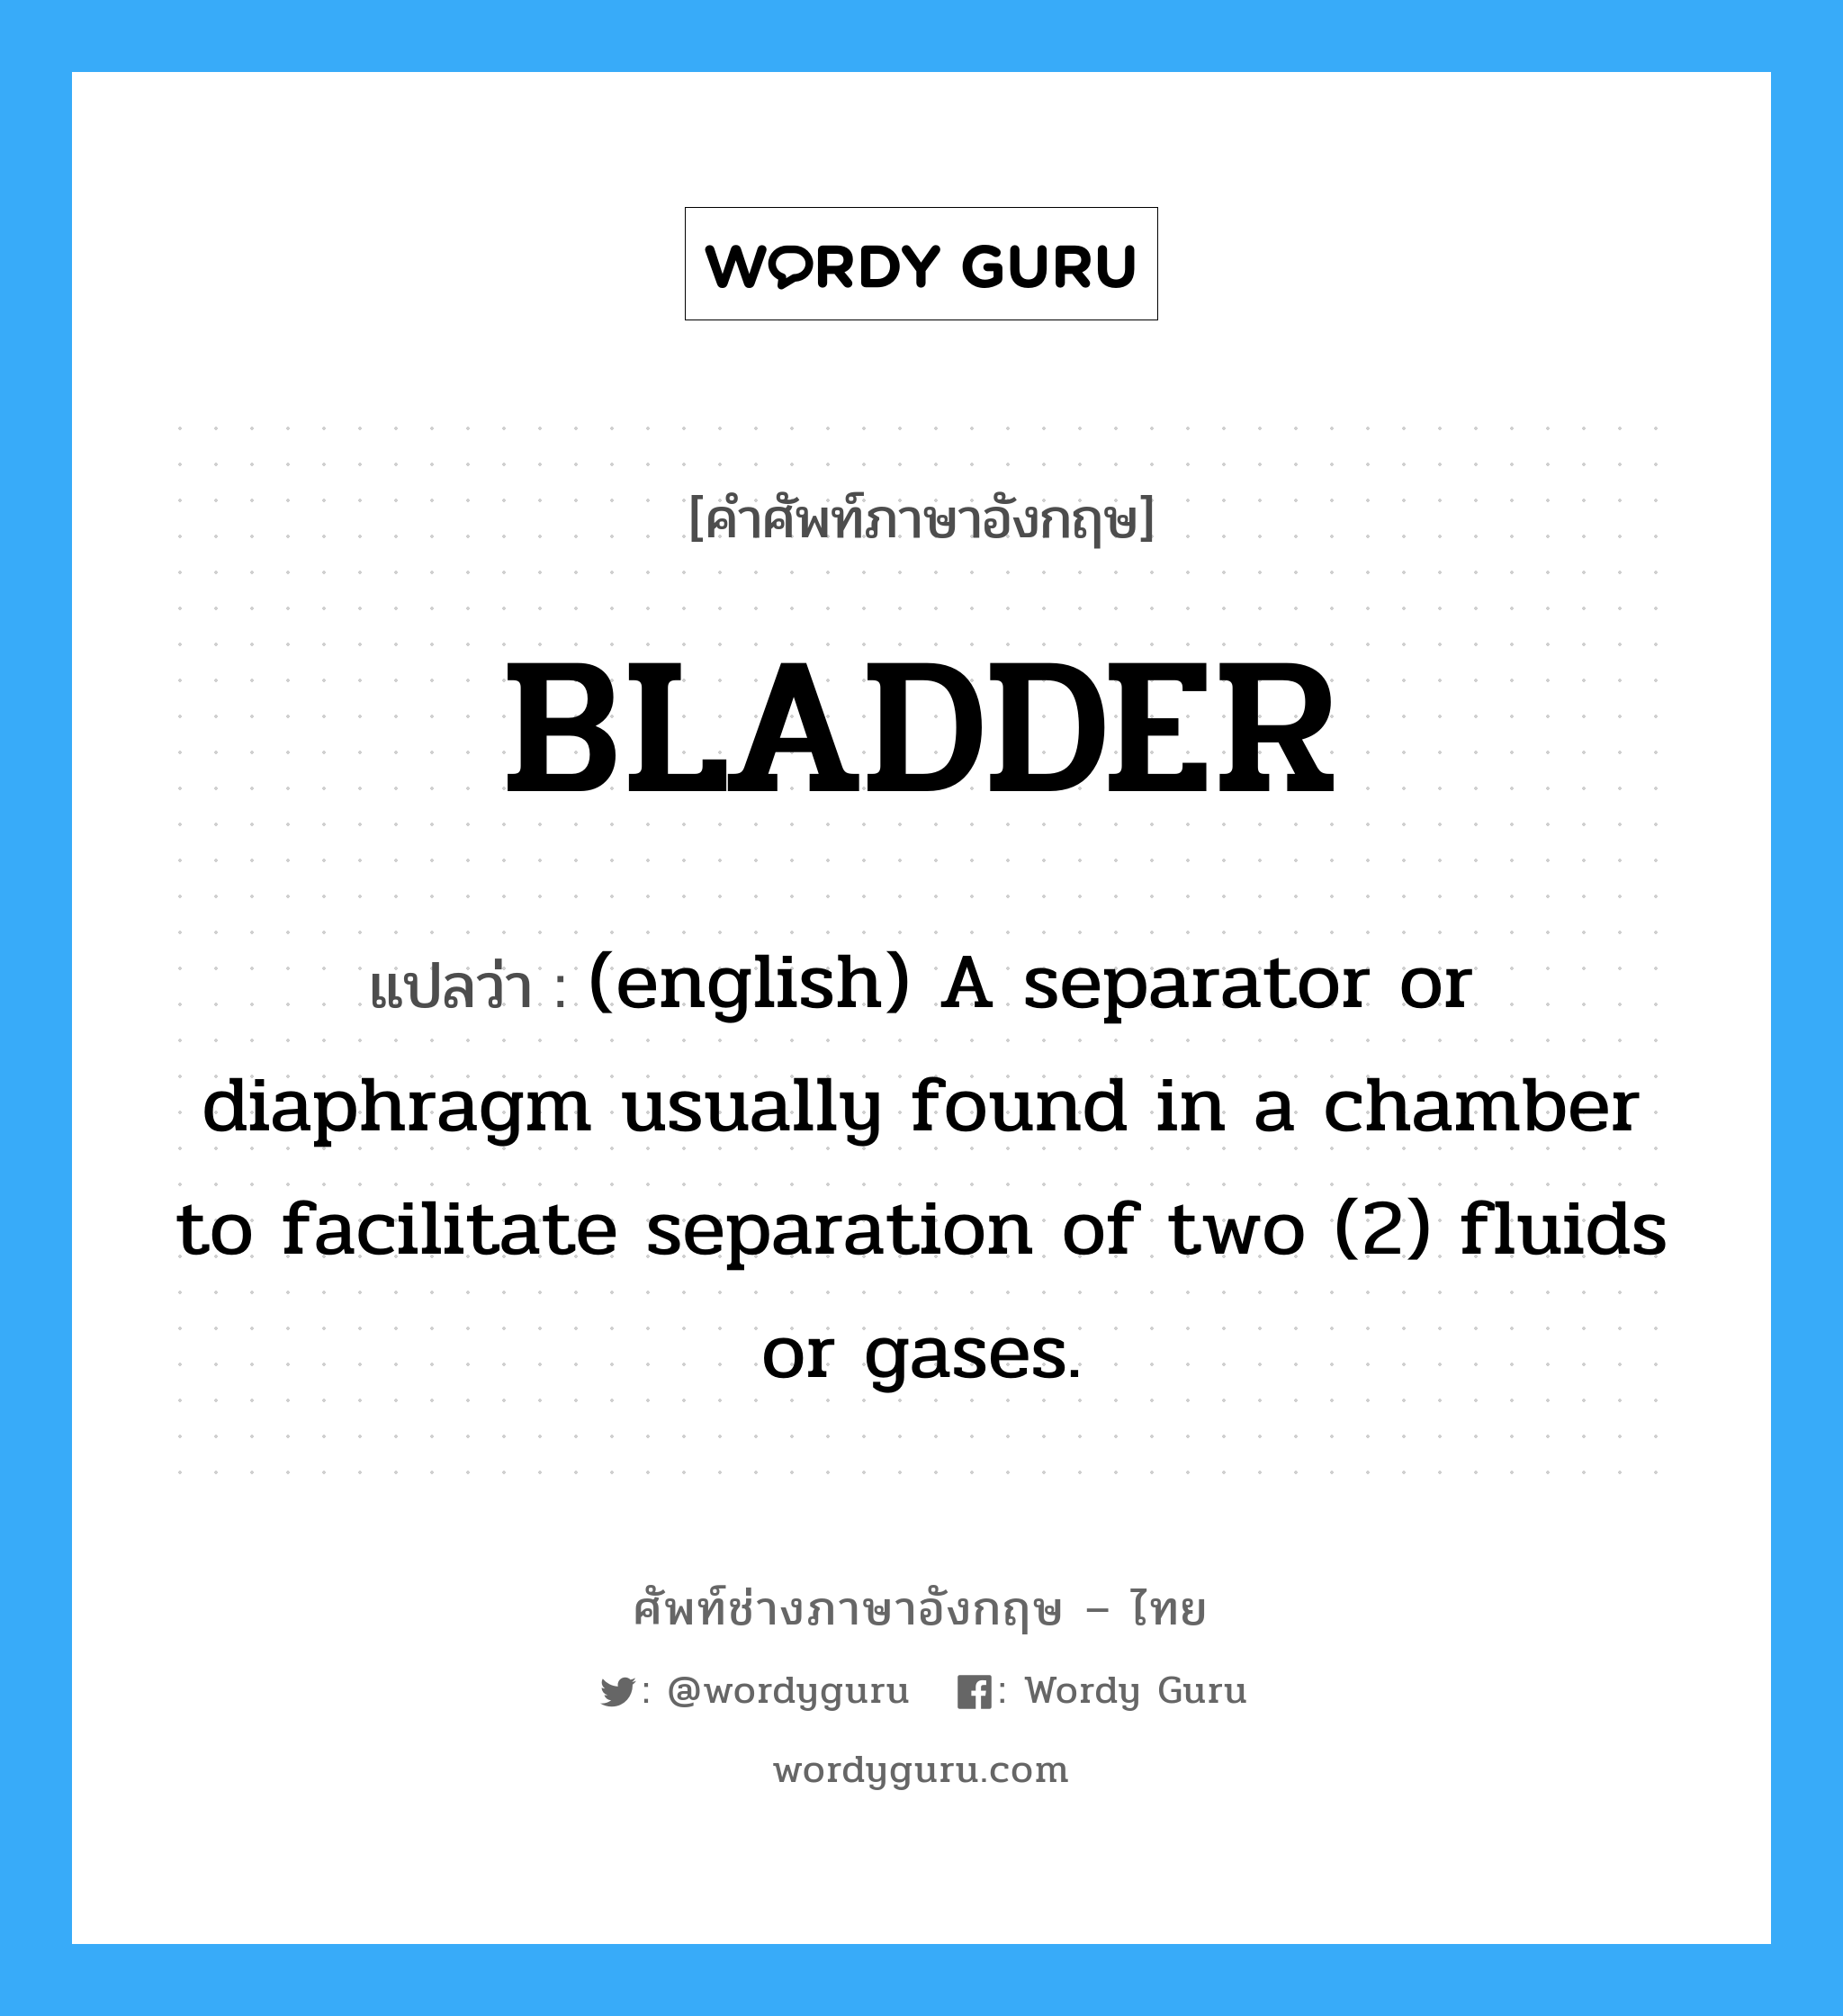 BLADDER แปลว่า?, คำศัพท์ช่างภาษาอังกฤษ - ไทย BLADDER คำศัพท์ภาษาอังกฤษ BLADDER แปลว่า (english) A separator or diaphragm usually found in a chamber to facilitate separation of two (2) fluids or gases.